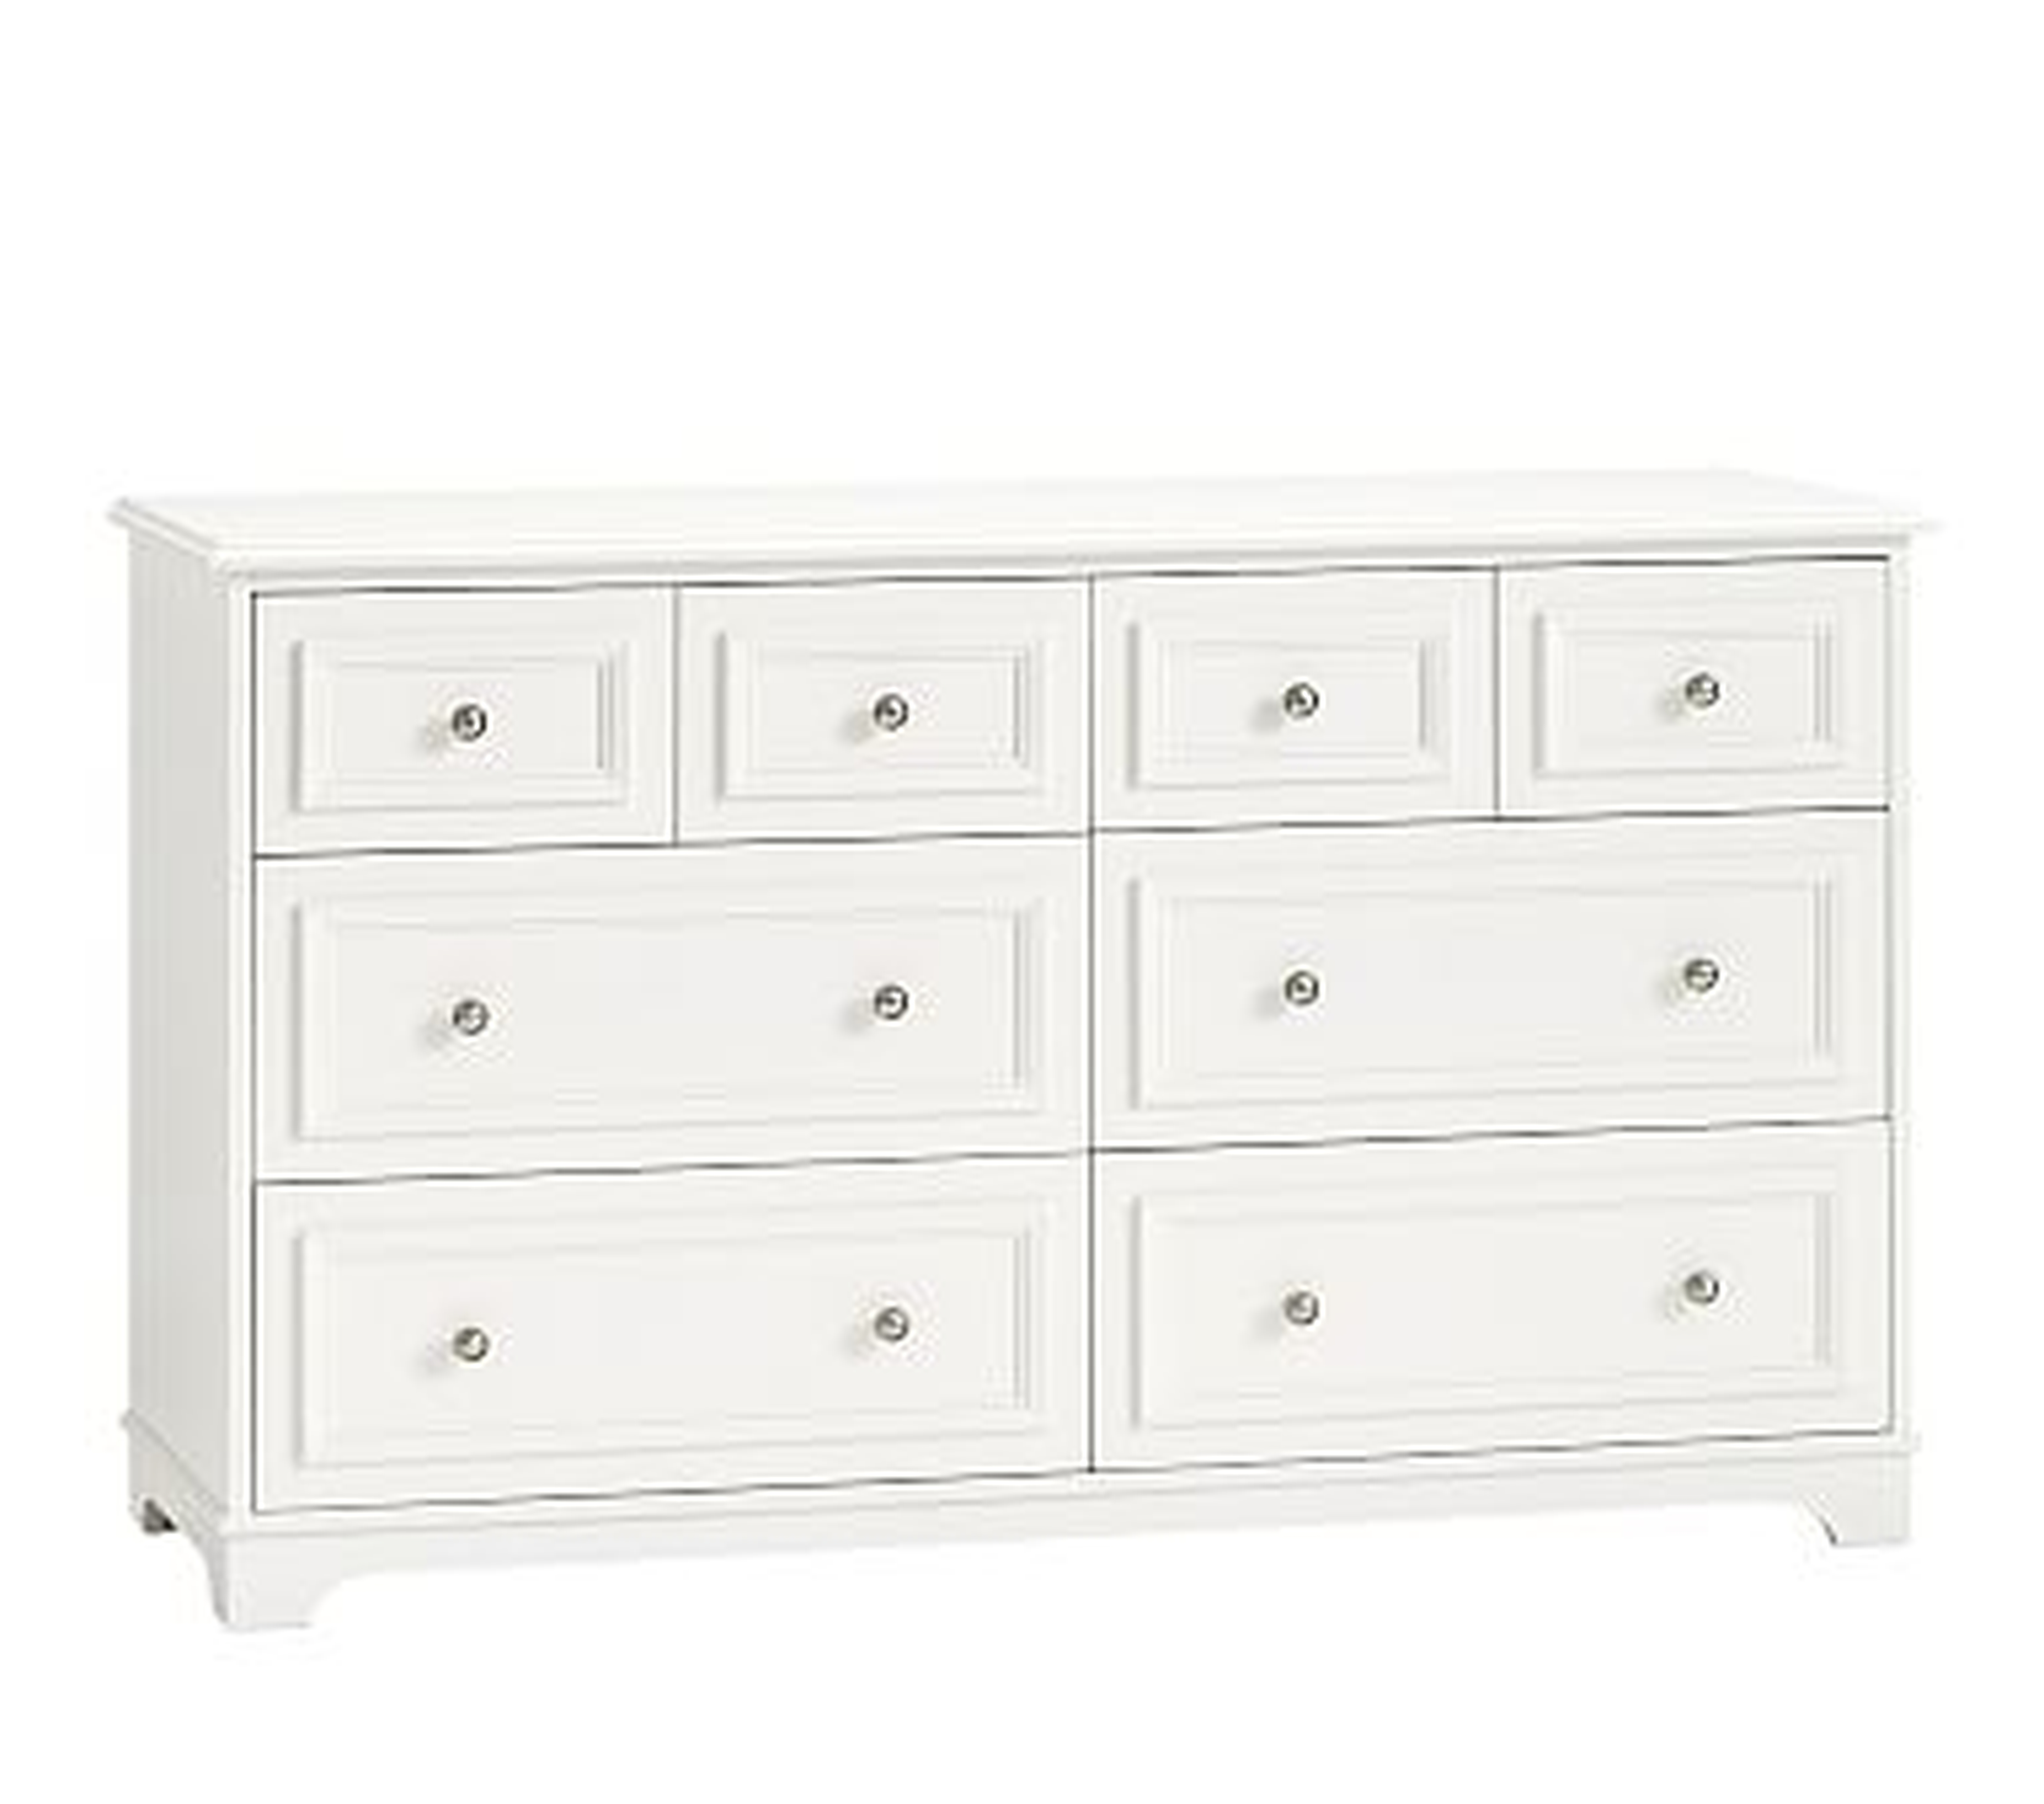 Fillmore Extra Wide Dresser, Simply White - Pottery Barn Kids